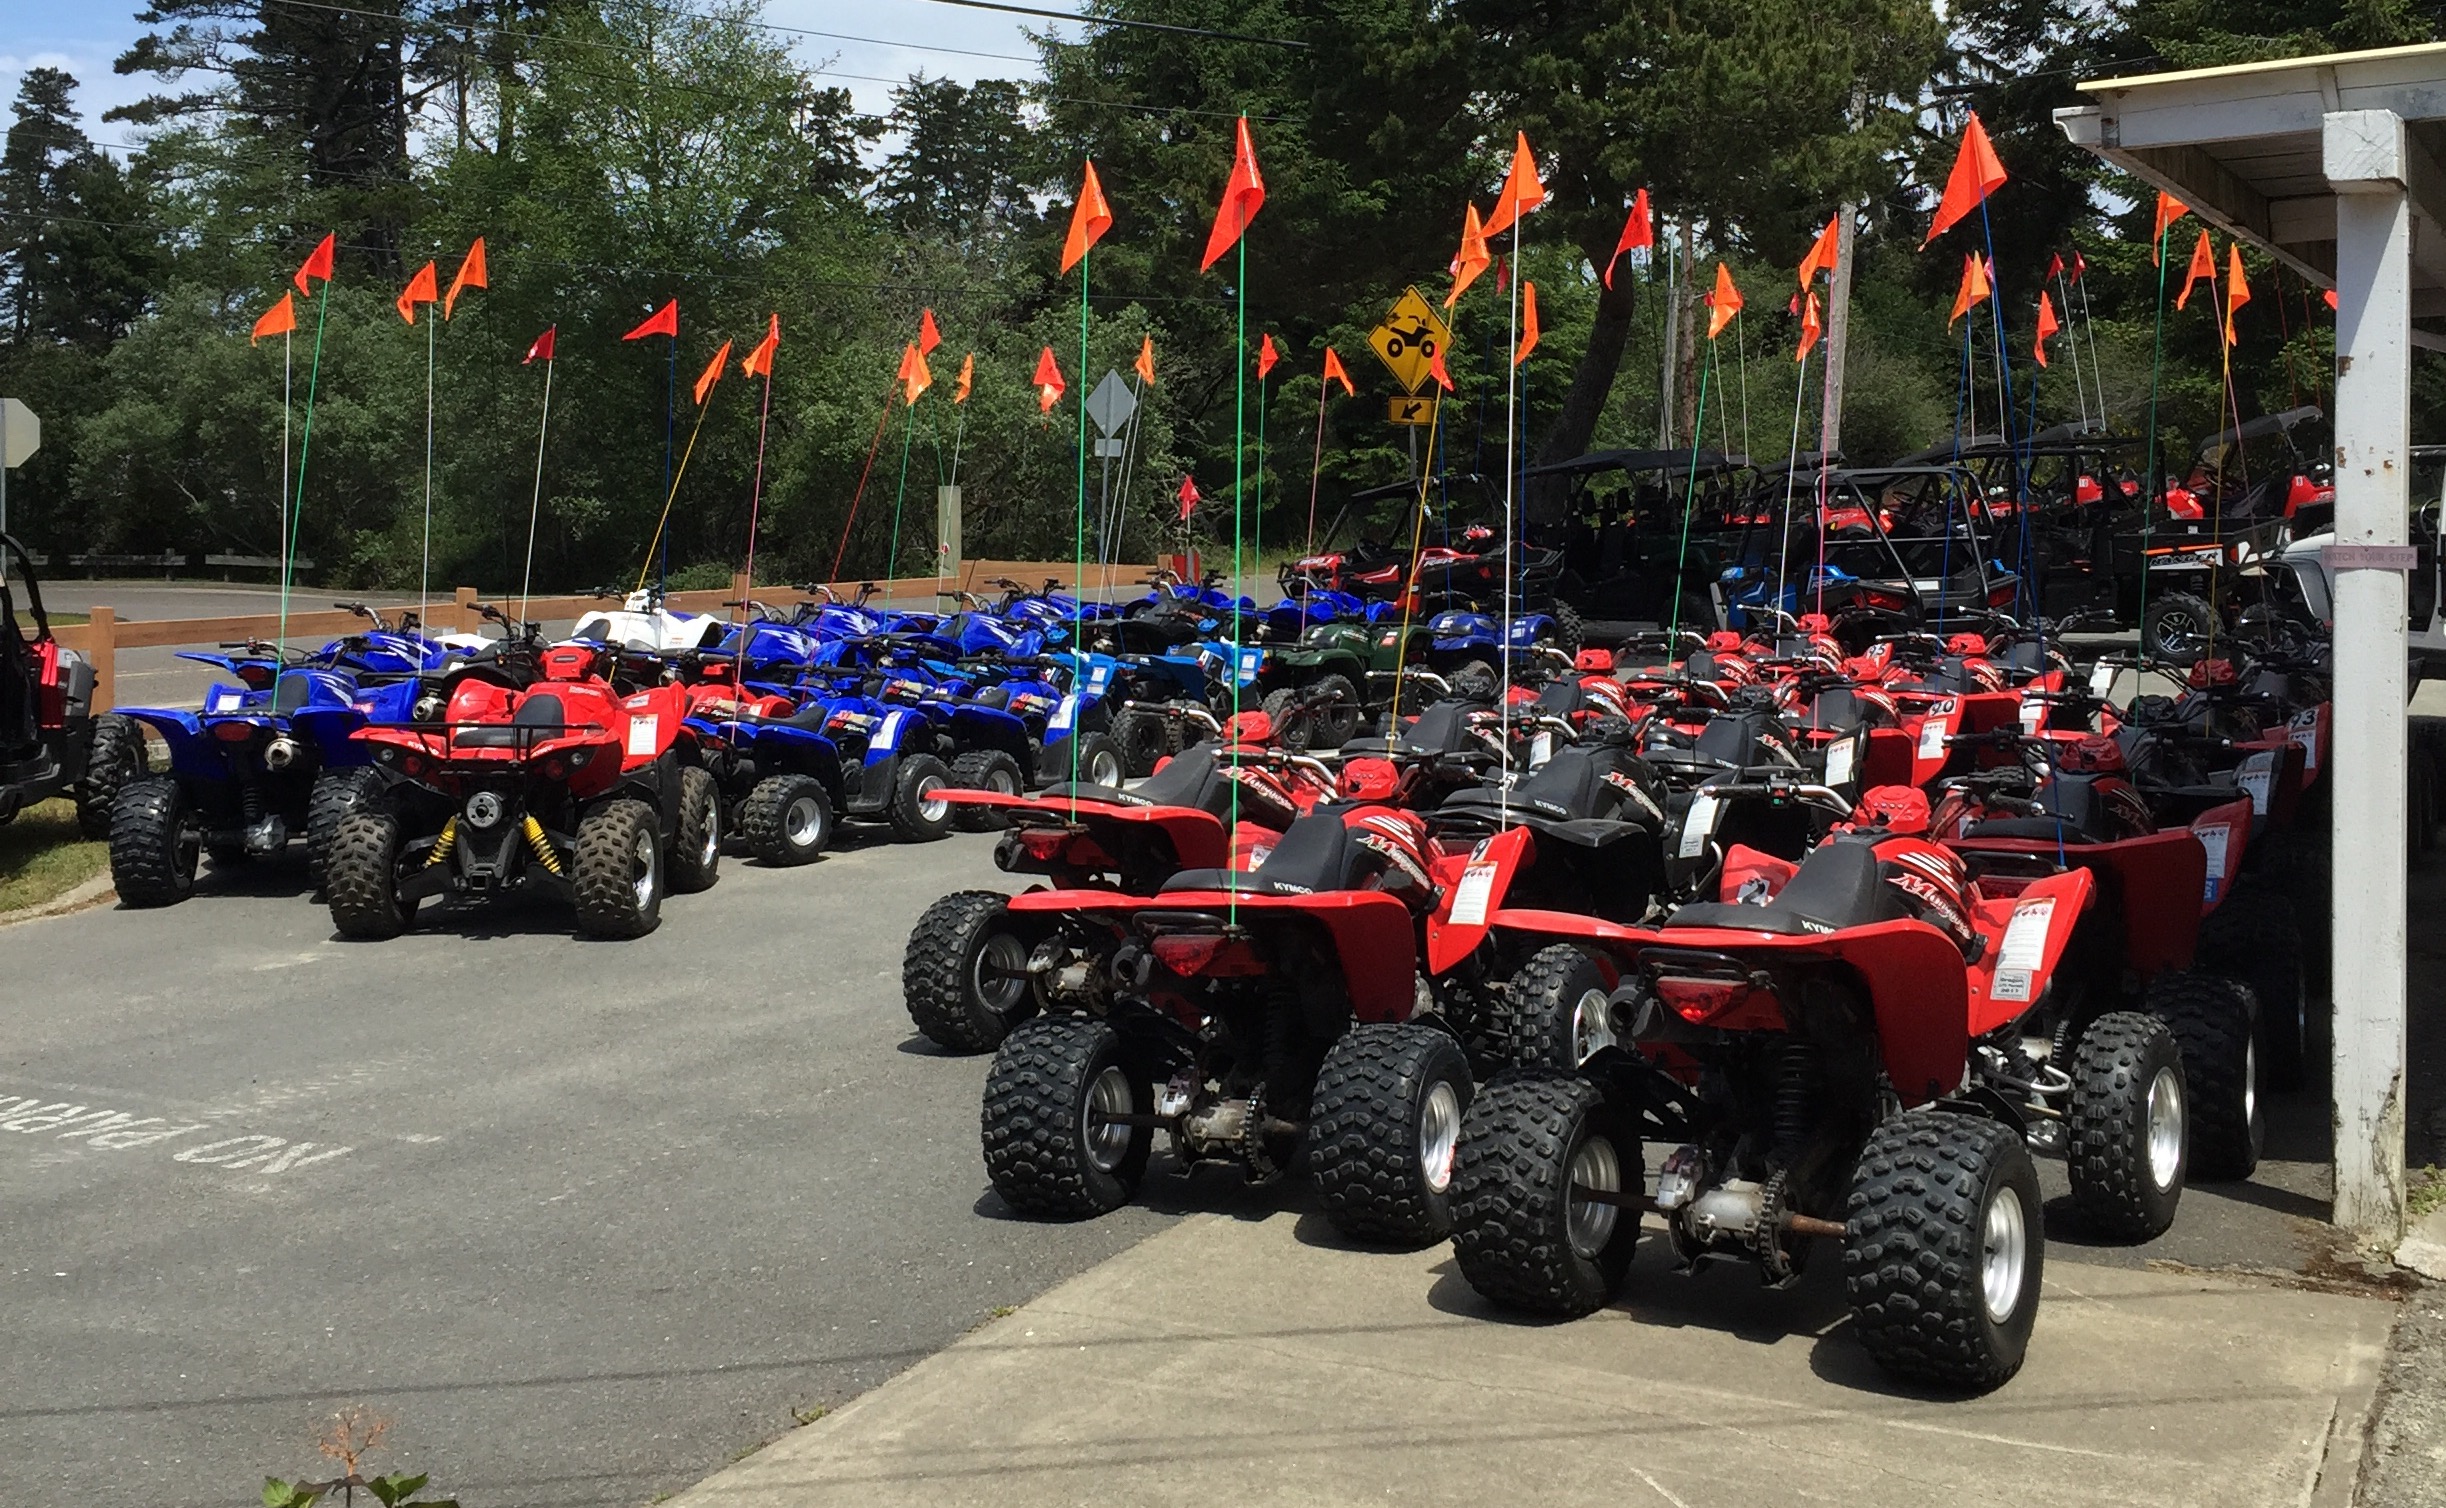 spinreel dune buggy and atv rentals and tours